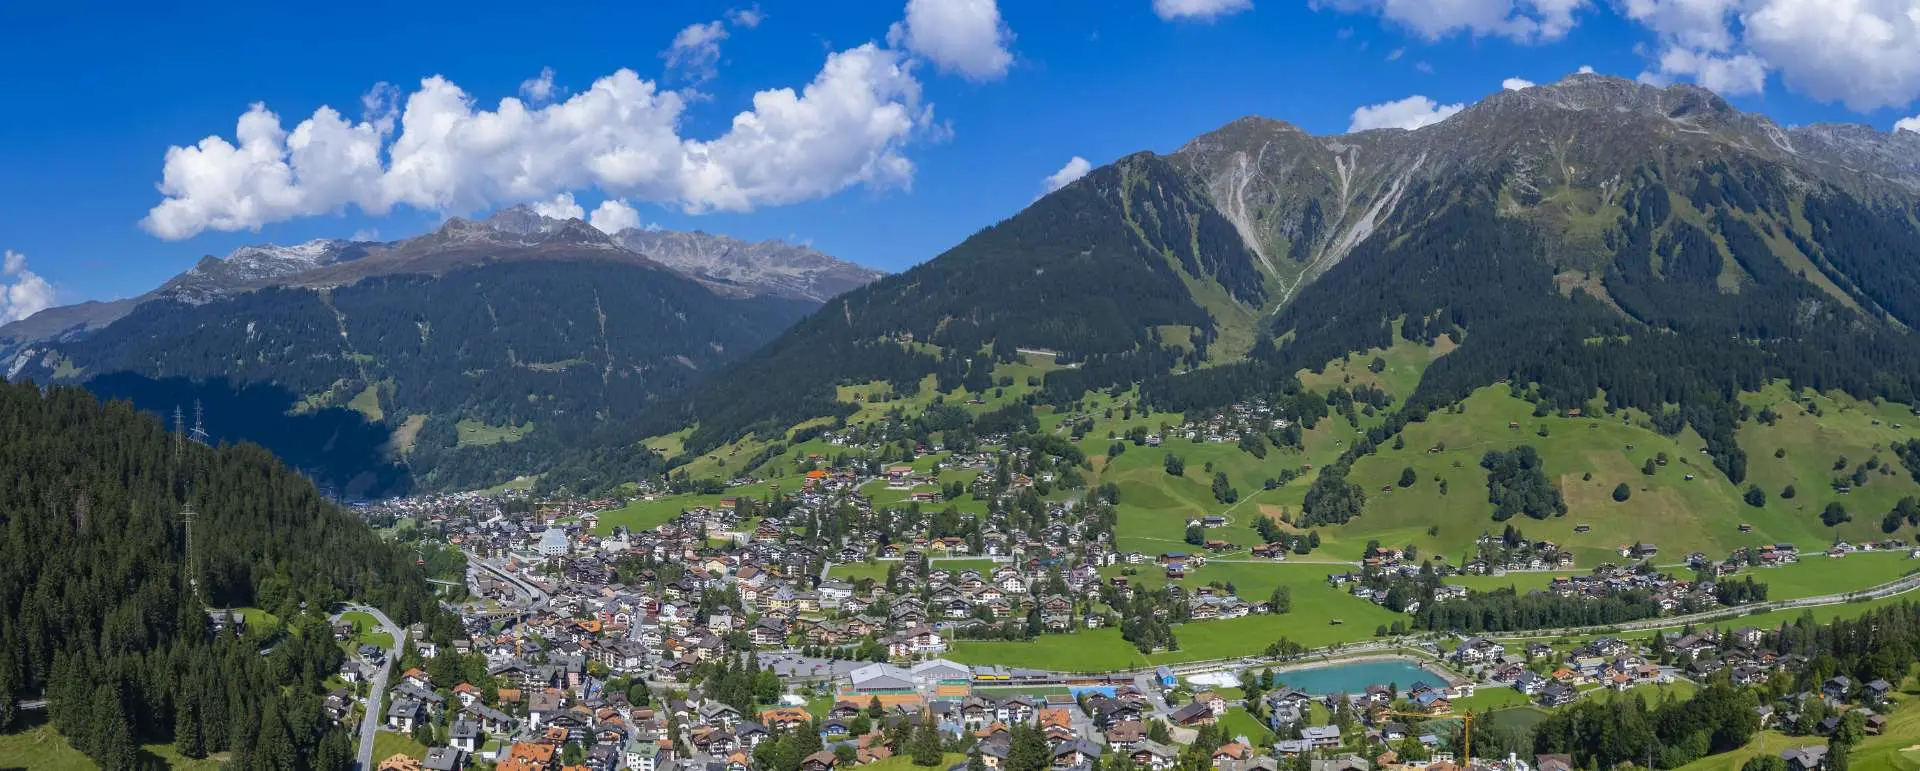 Klosters-Serneus - Top incentive travel hotels for rewarding experiences